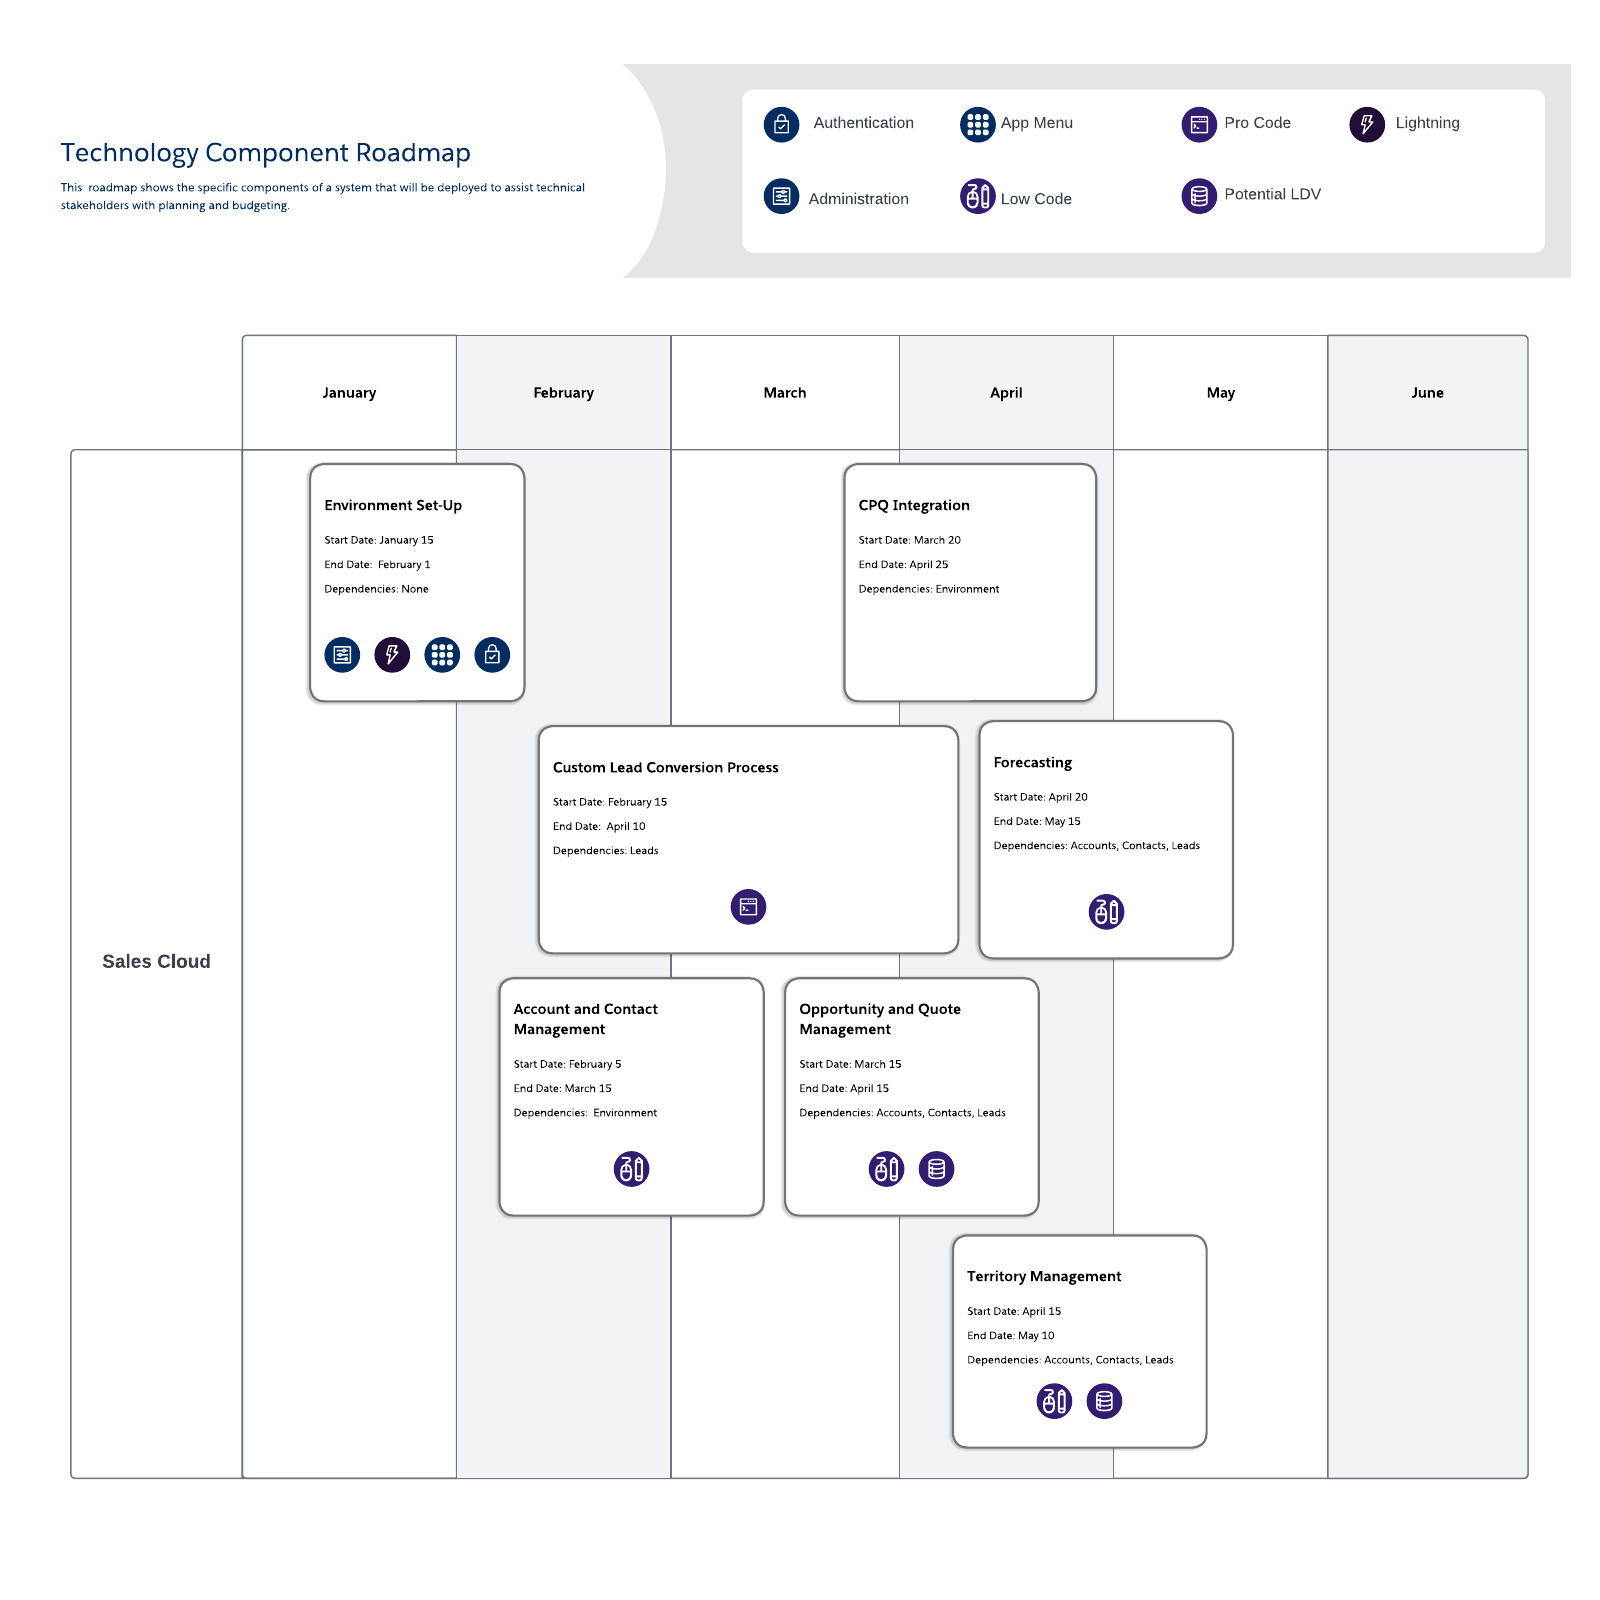 Technology Component Roadmap example